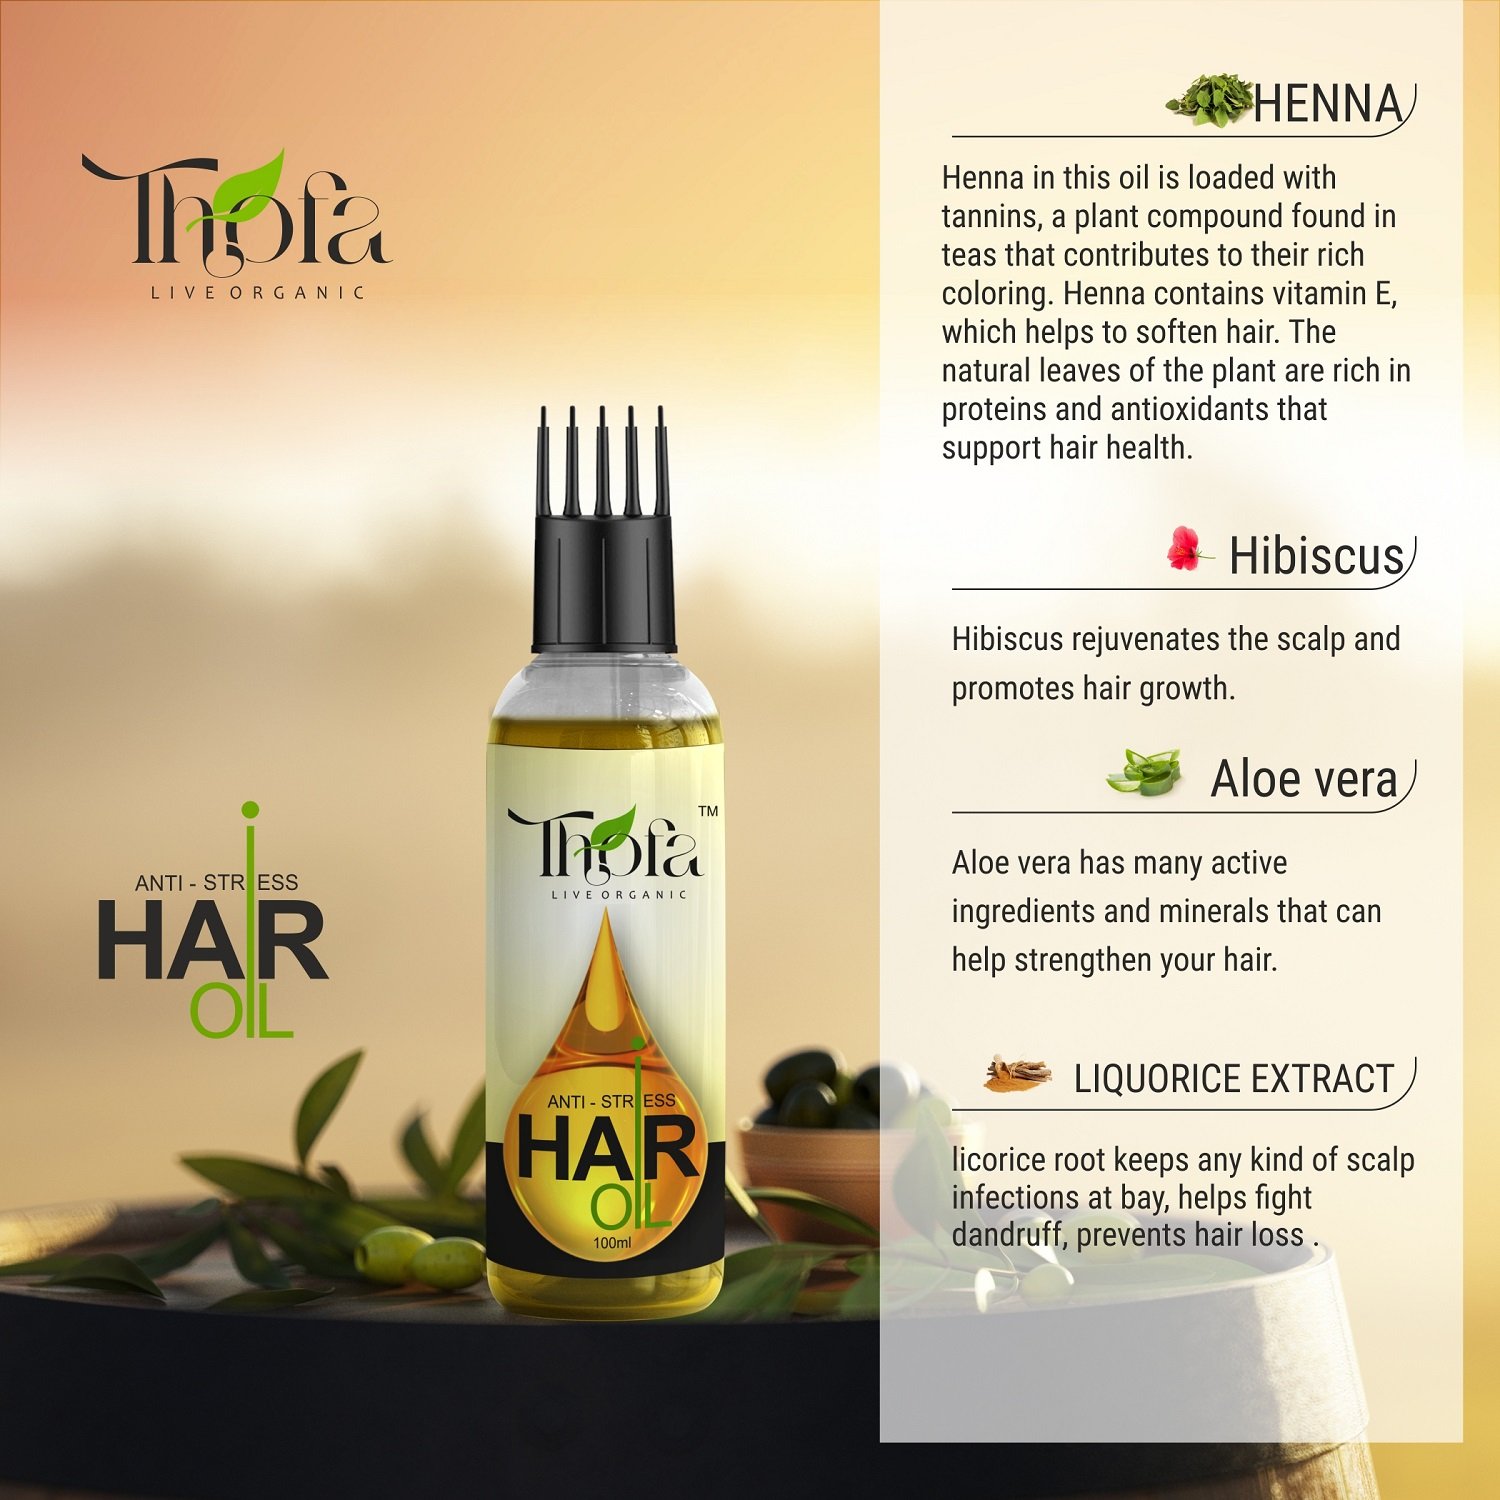 Thofa Anti Stress Hair Oil Enriched with Henna, Neem, Onion & Almond Oil |  Natural Hair-care Oil | For Men & Women | 100ML